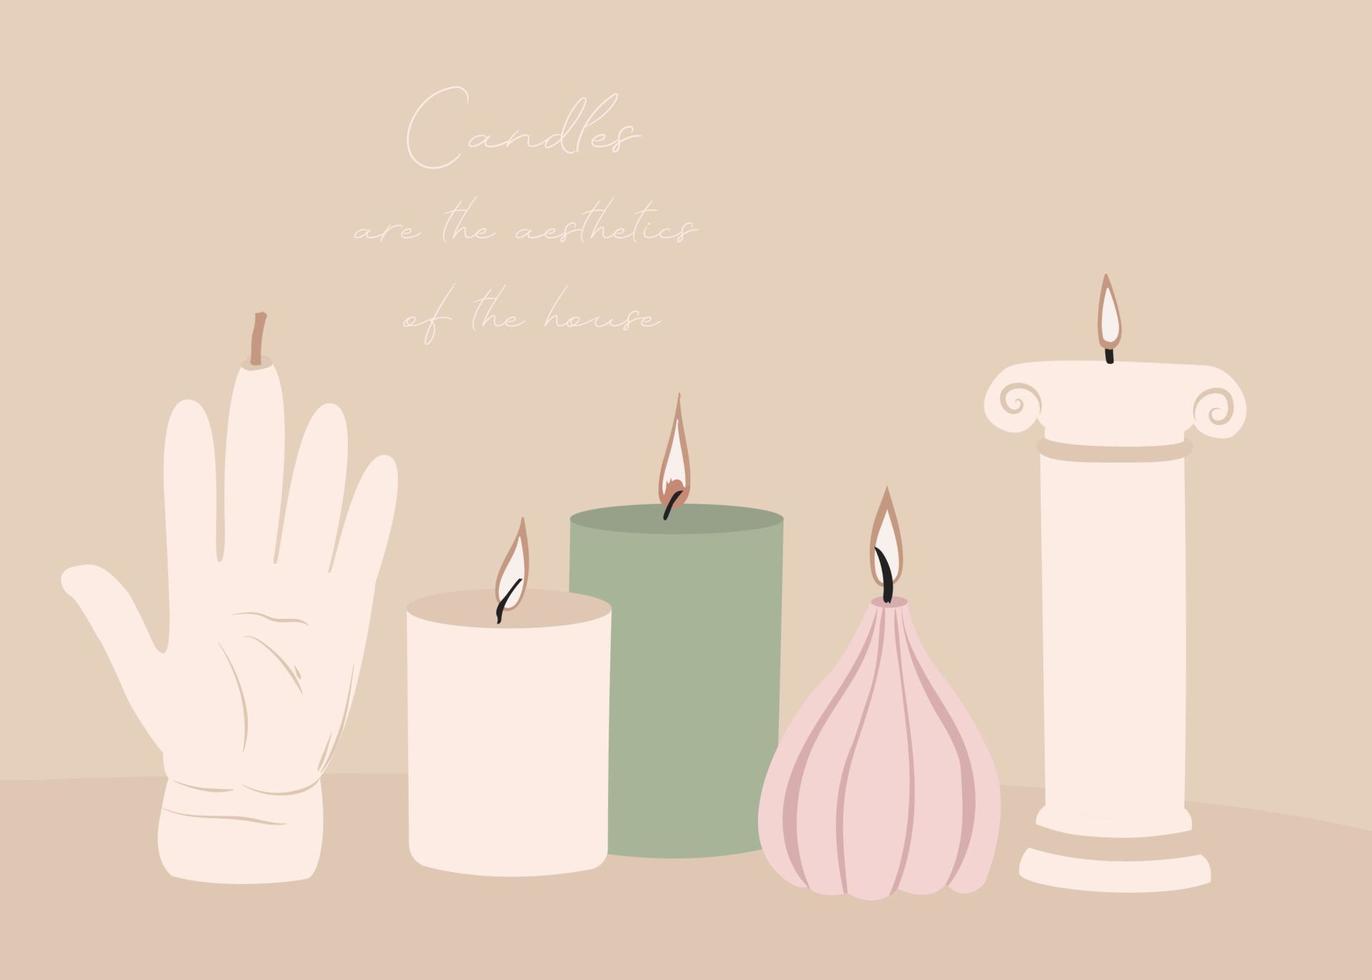 beautiful aesthetic candle, lit, an element of decor and comfort for the home, on a beige background. vector